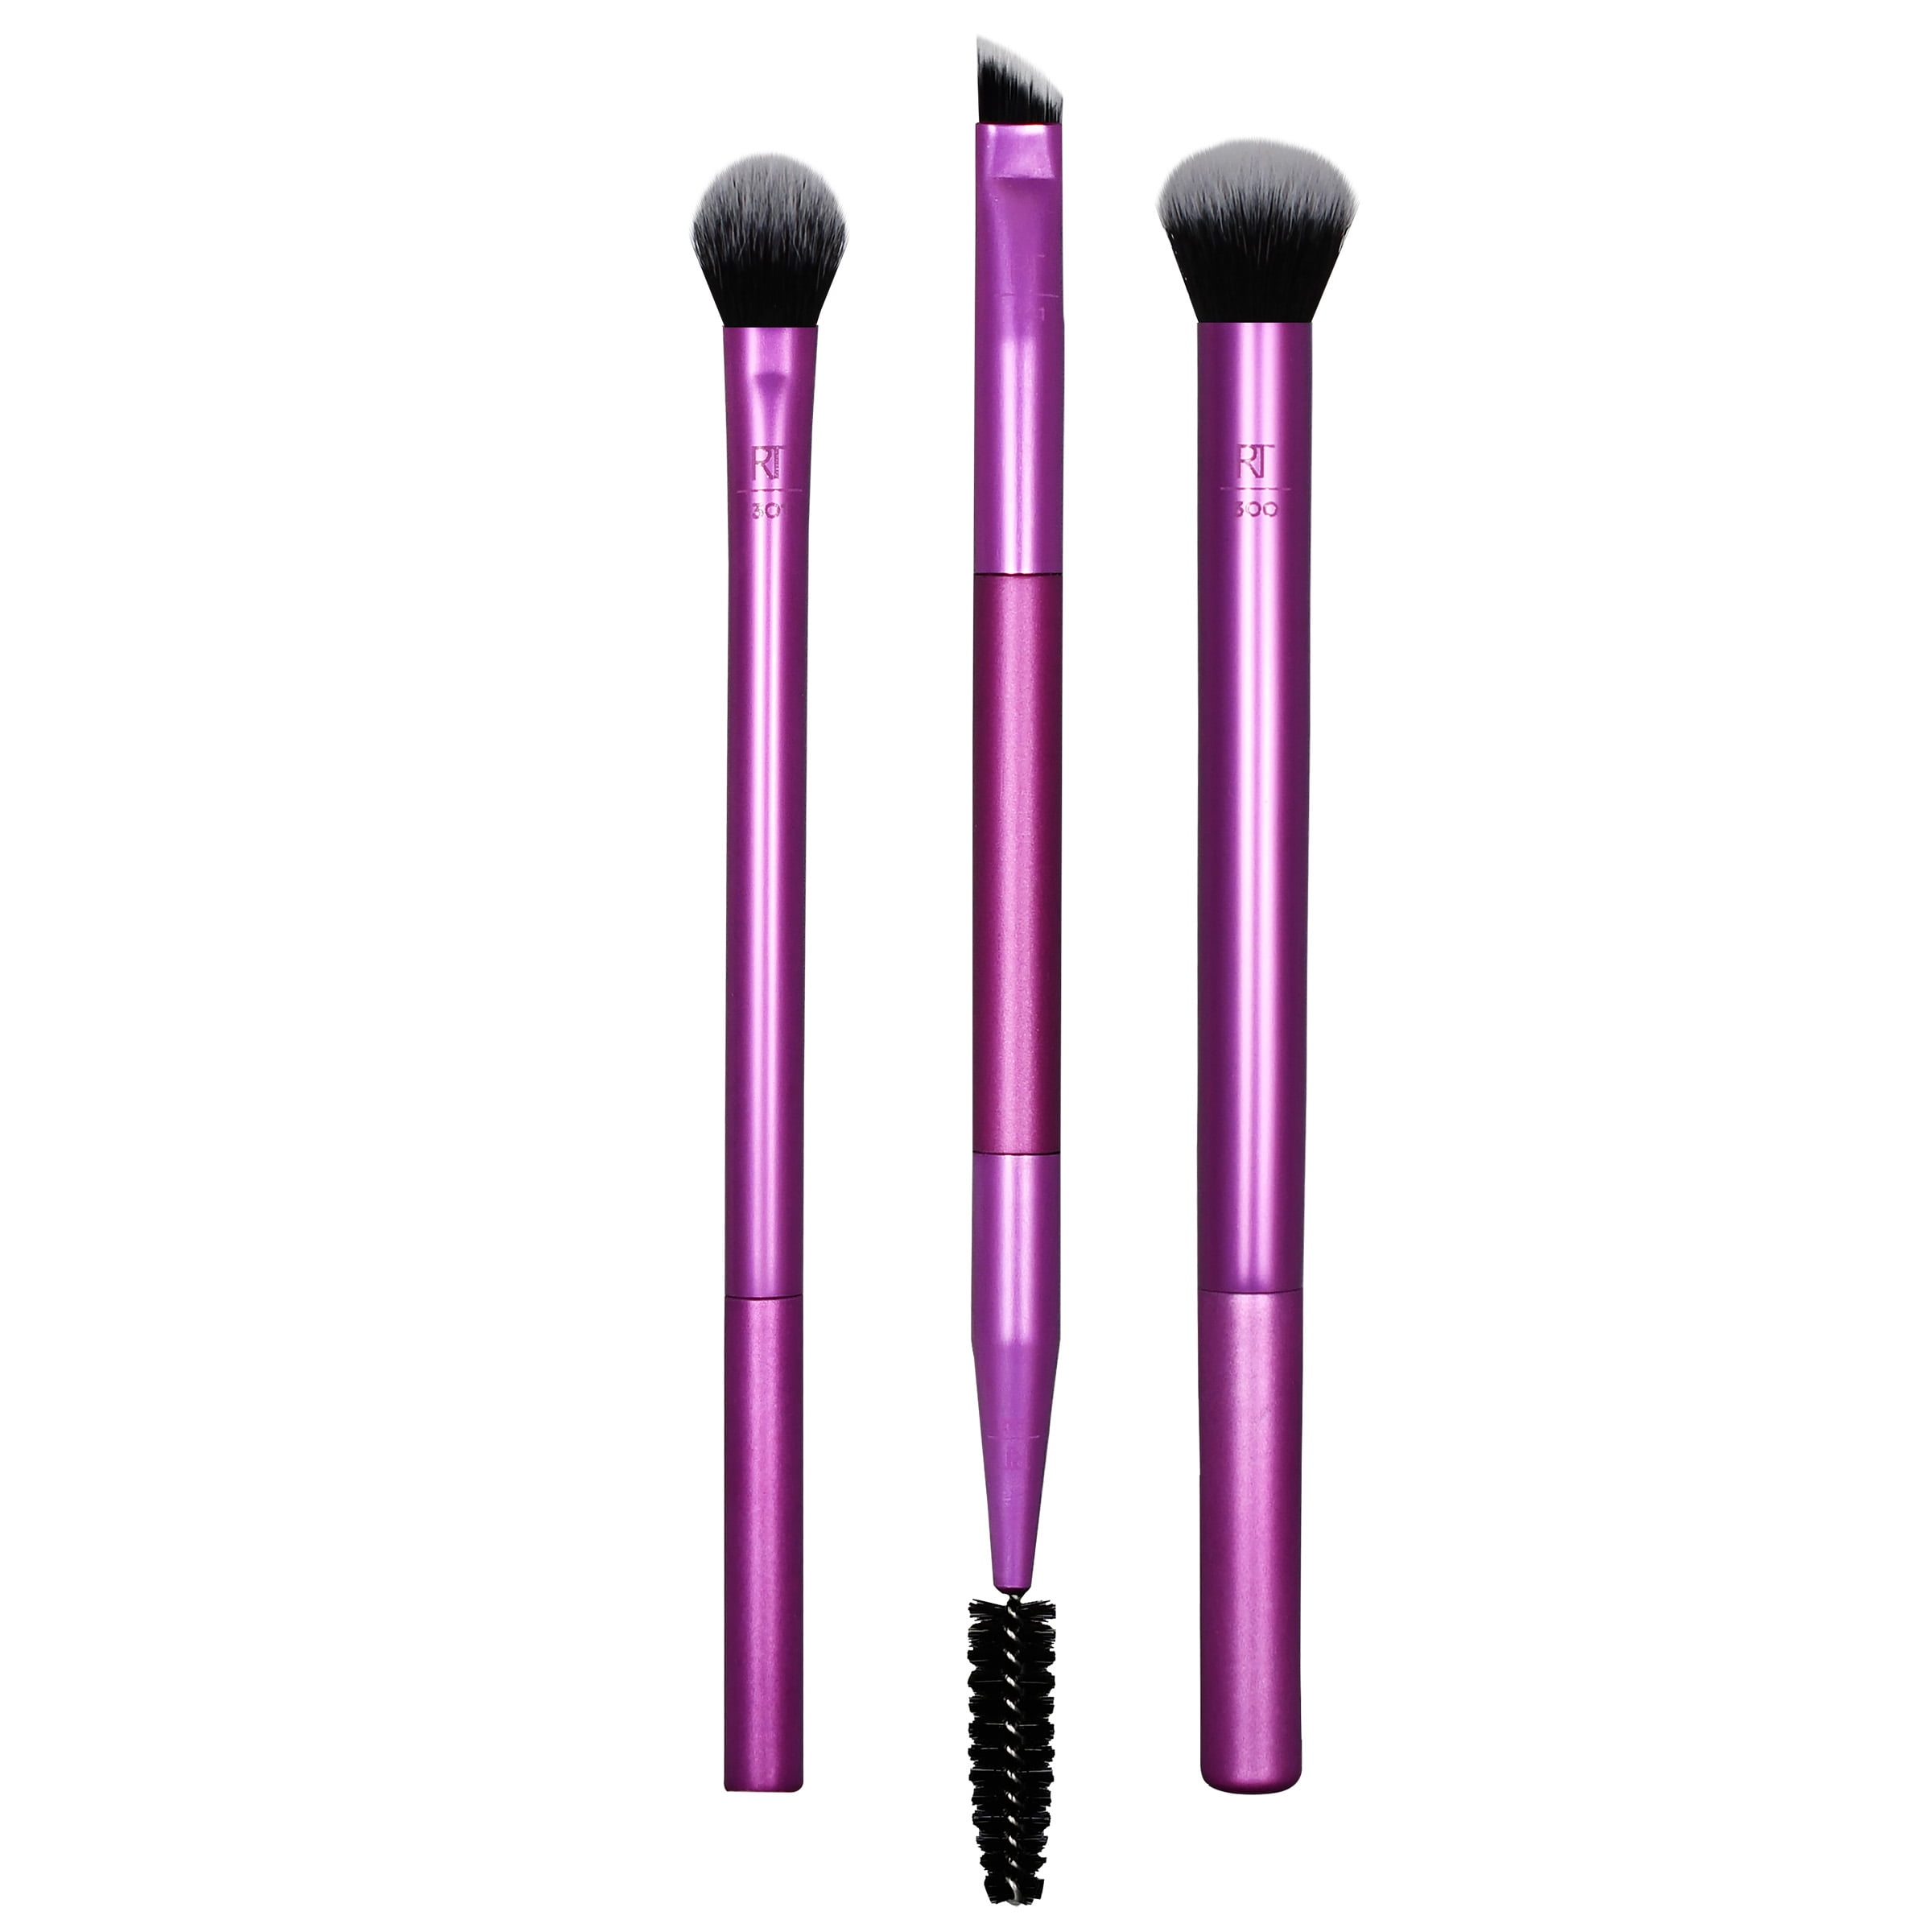 Real Techniques Eye Shade & Blend Makeup Brush Trio, For Layering